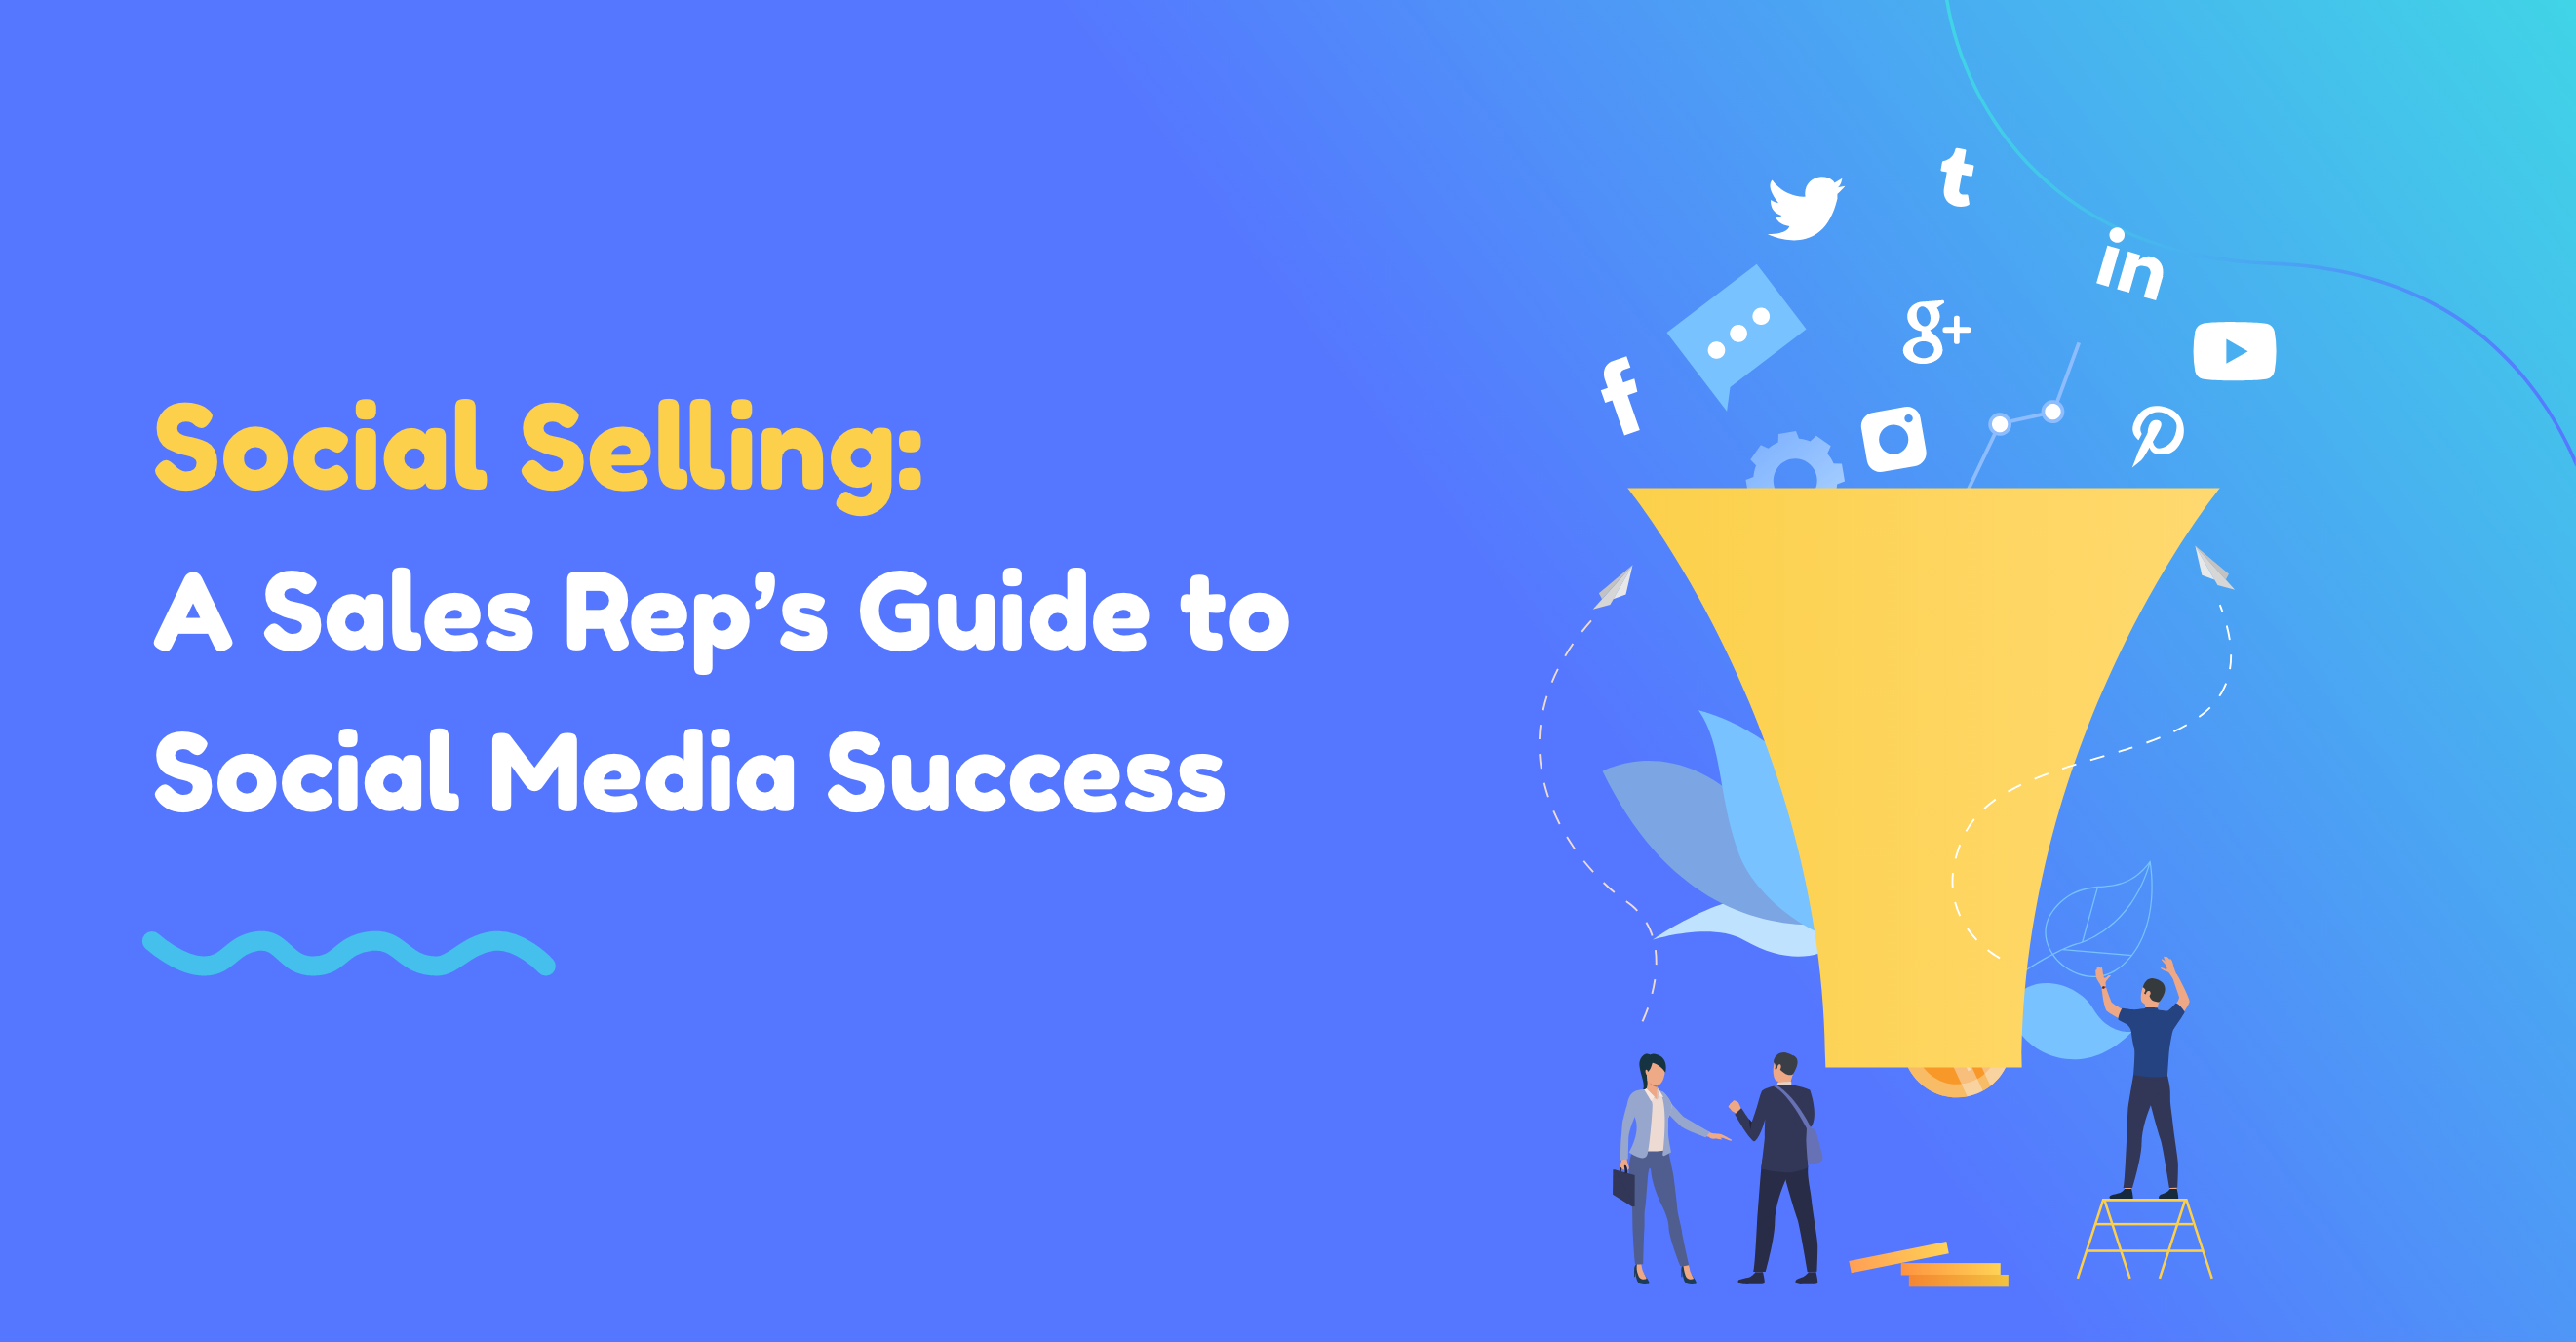 Social Selling: A Sales Rep’s Guide to Social Media Success